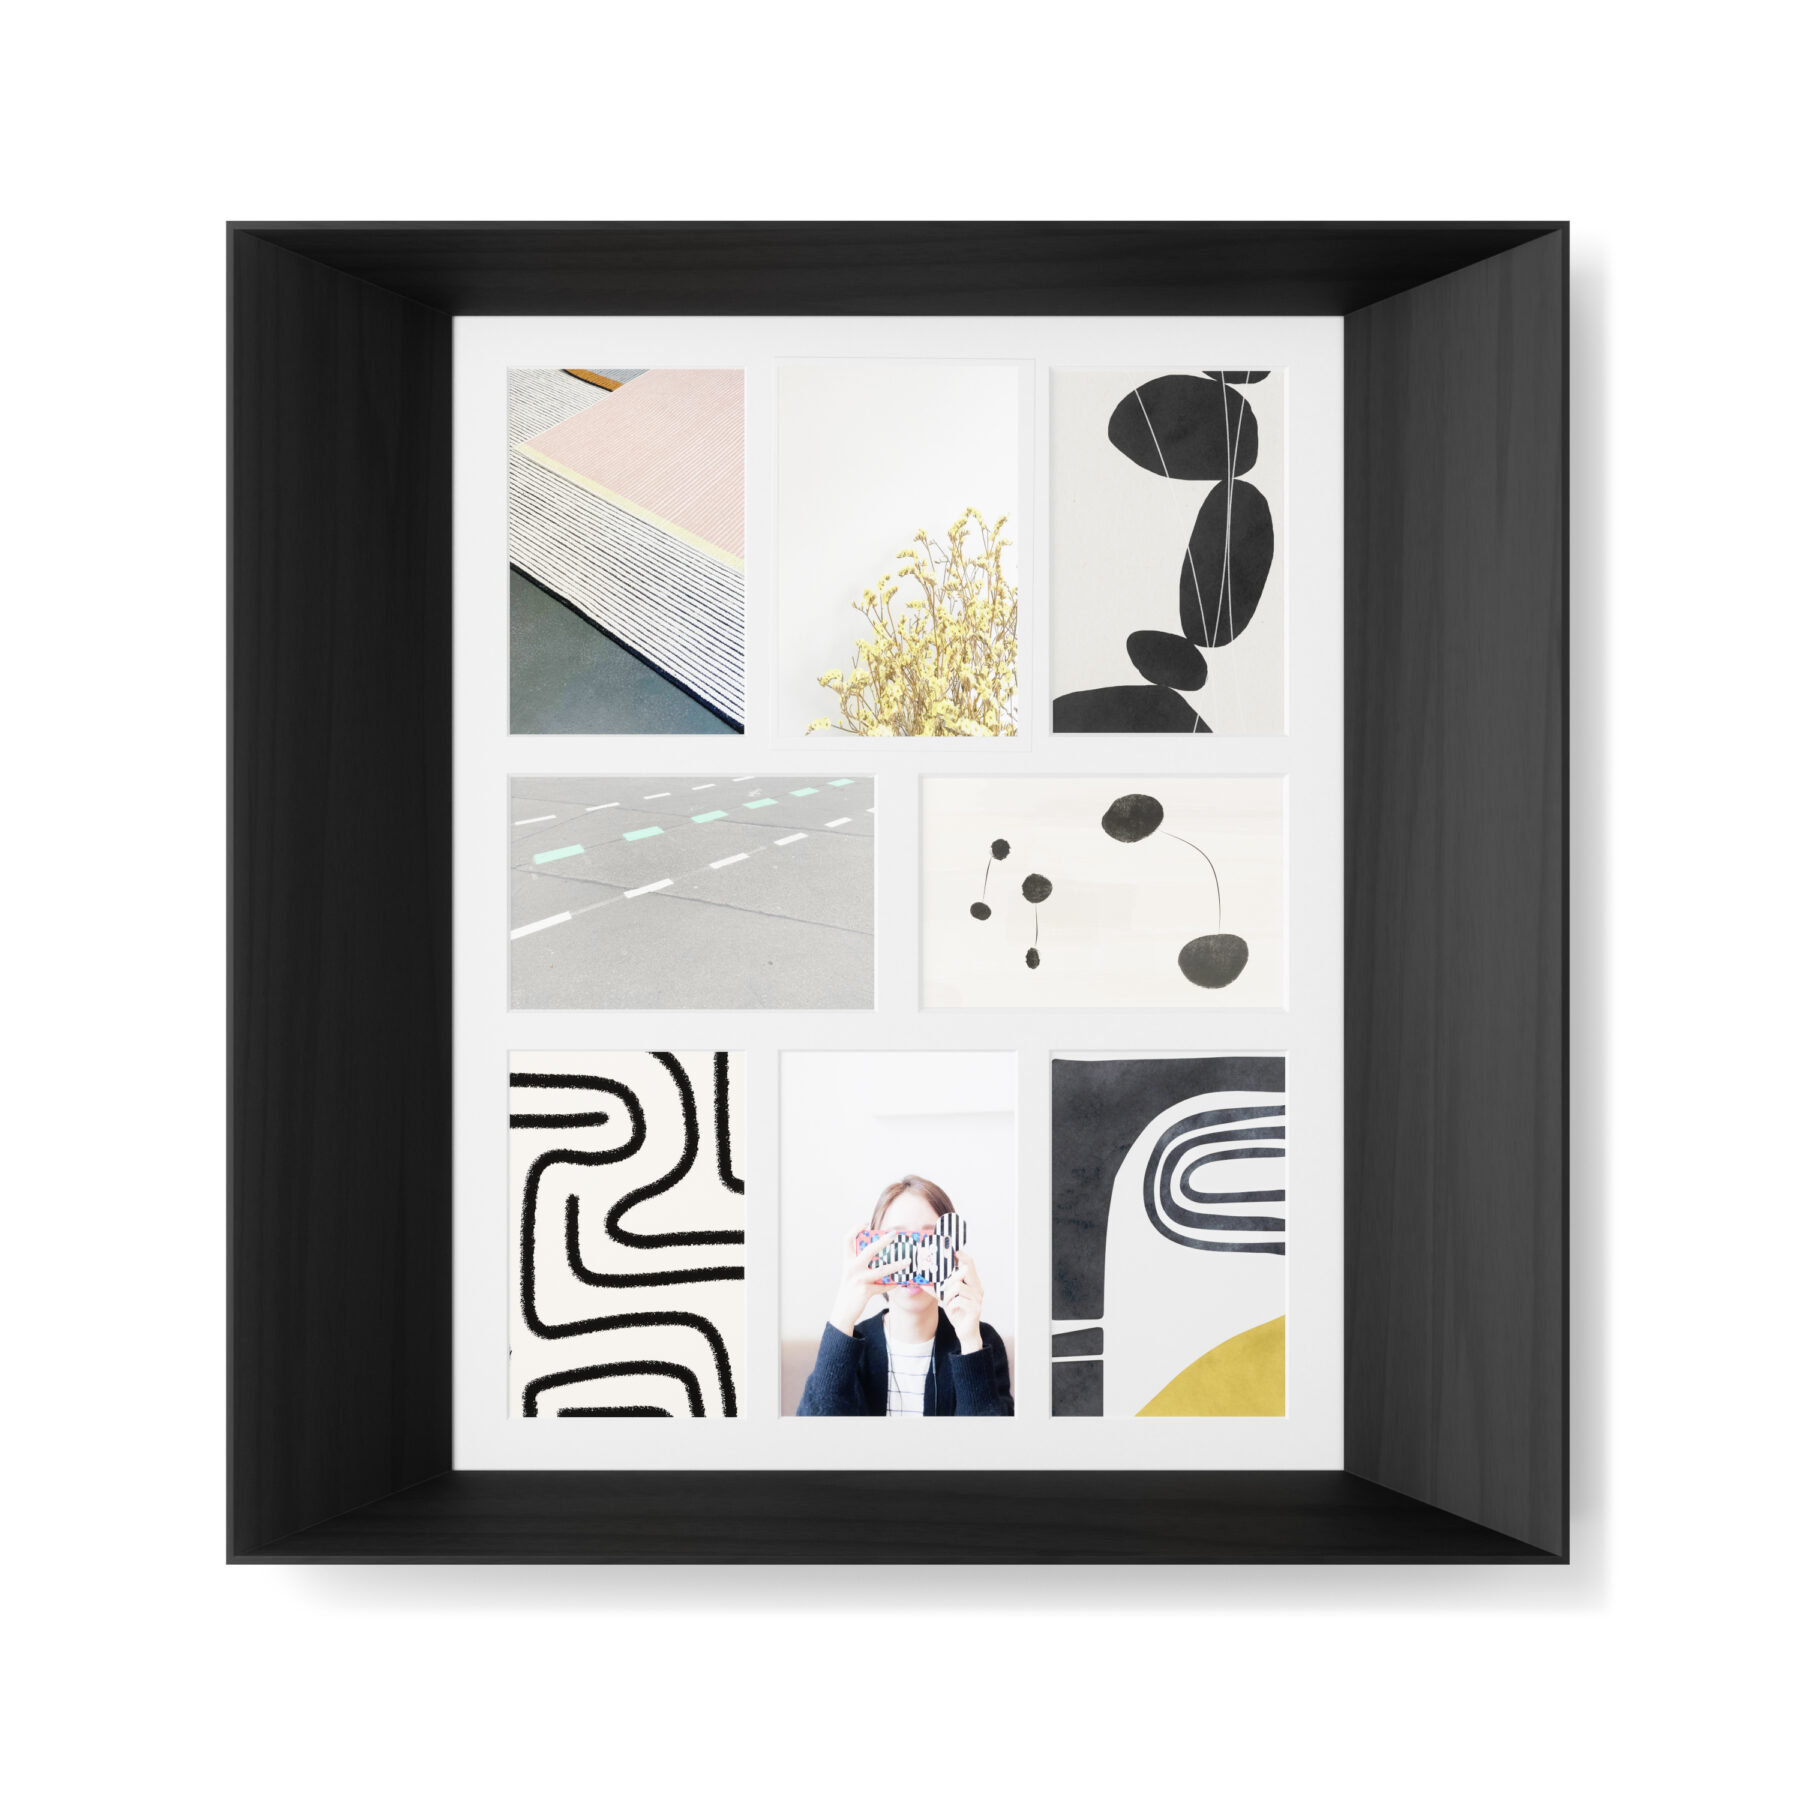 meaning you can use multiple Lookout frames to create a grid collage on your wall.